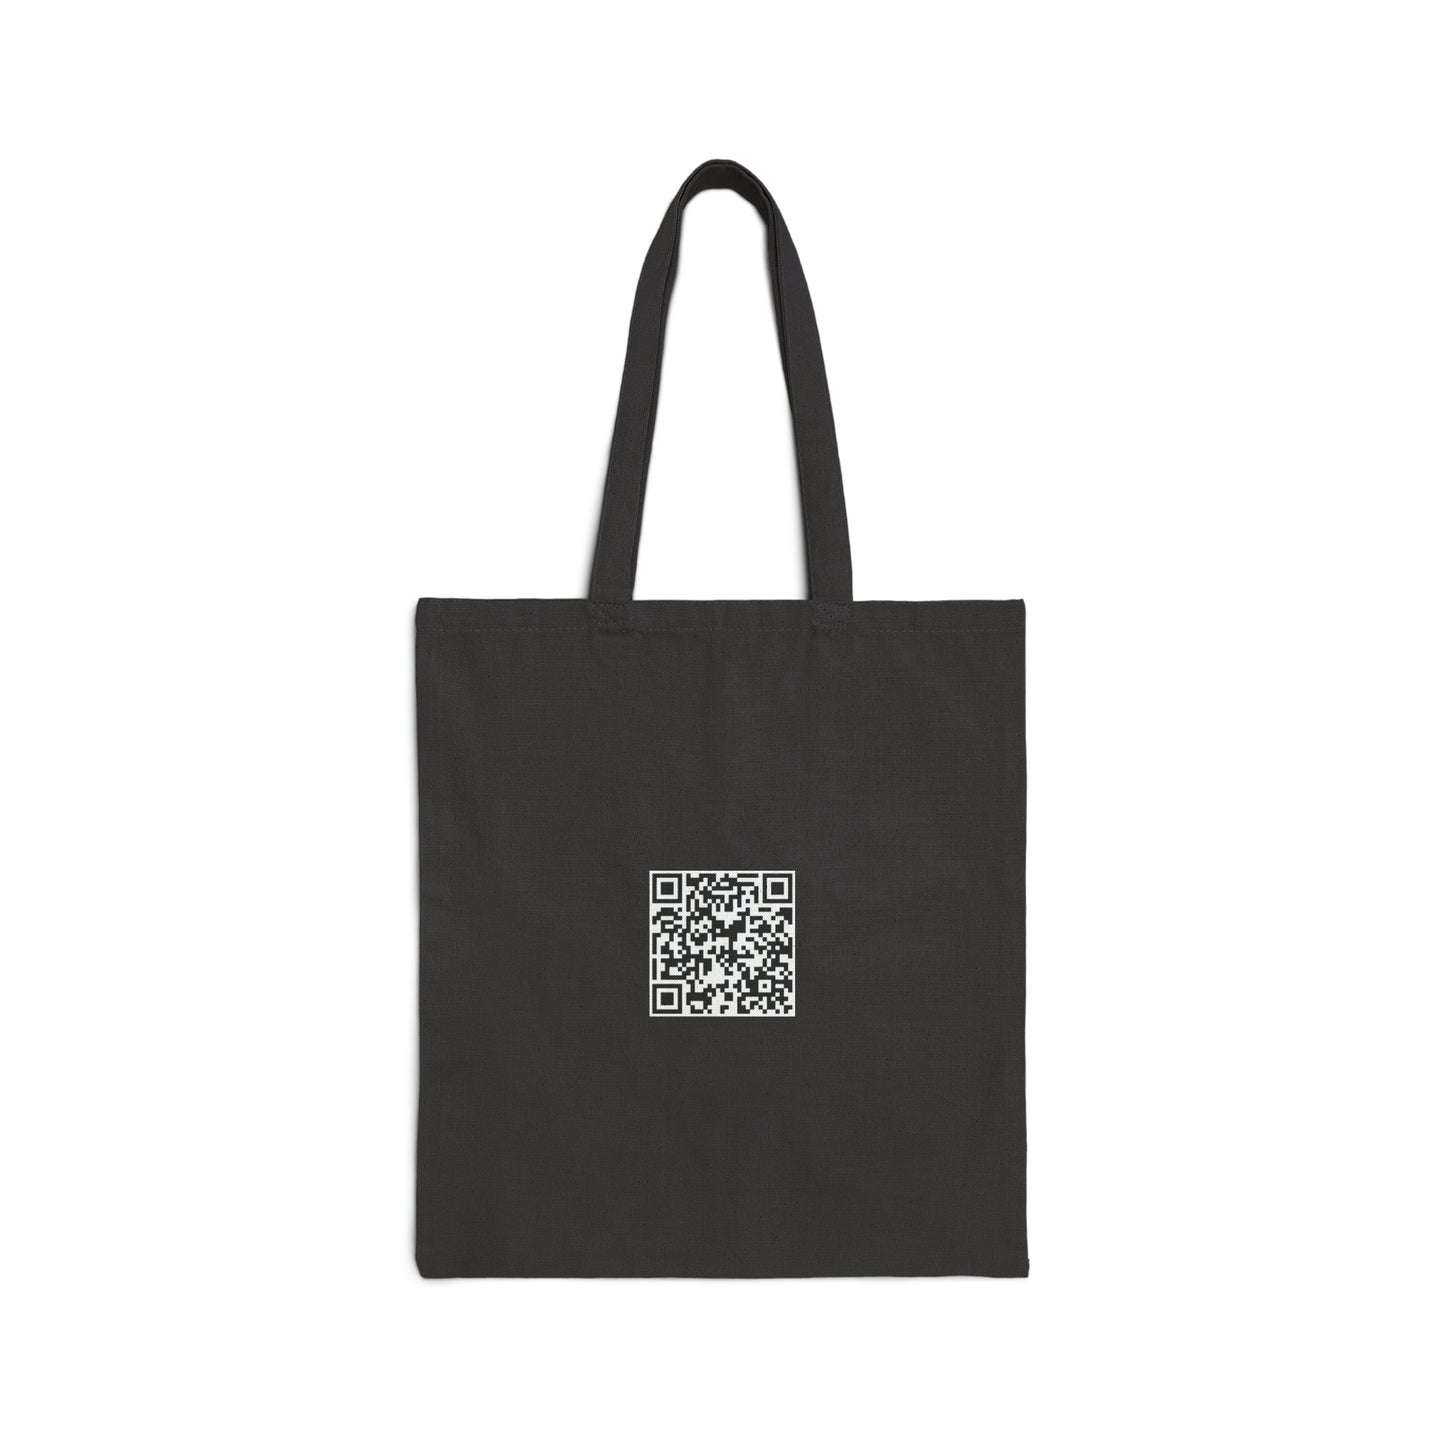 Breaking Into The Light - Cotton Canvas Tote Bag